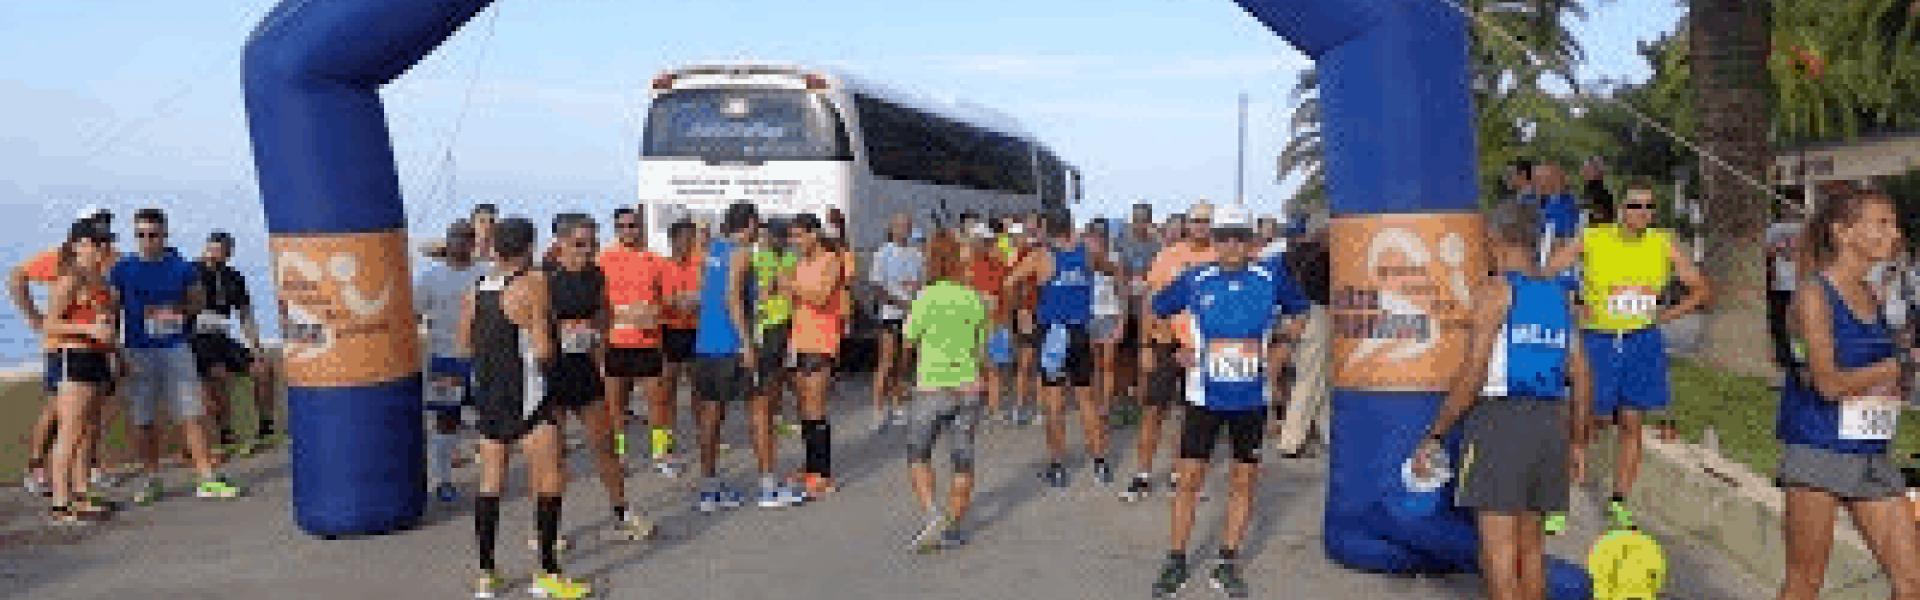 Athletes at the starting point